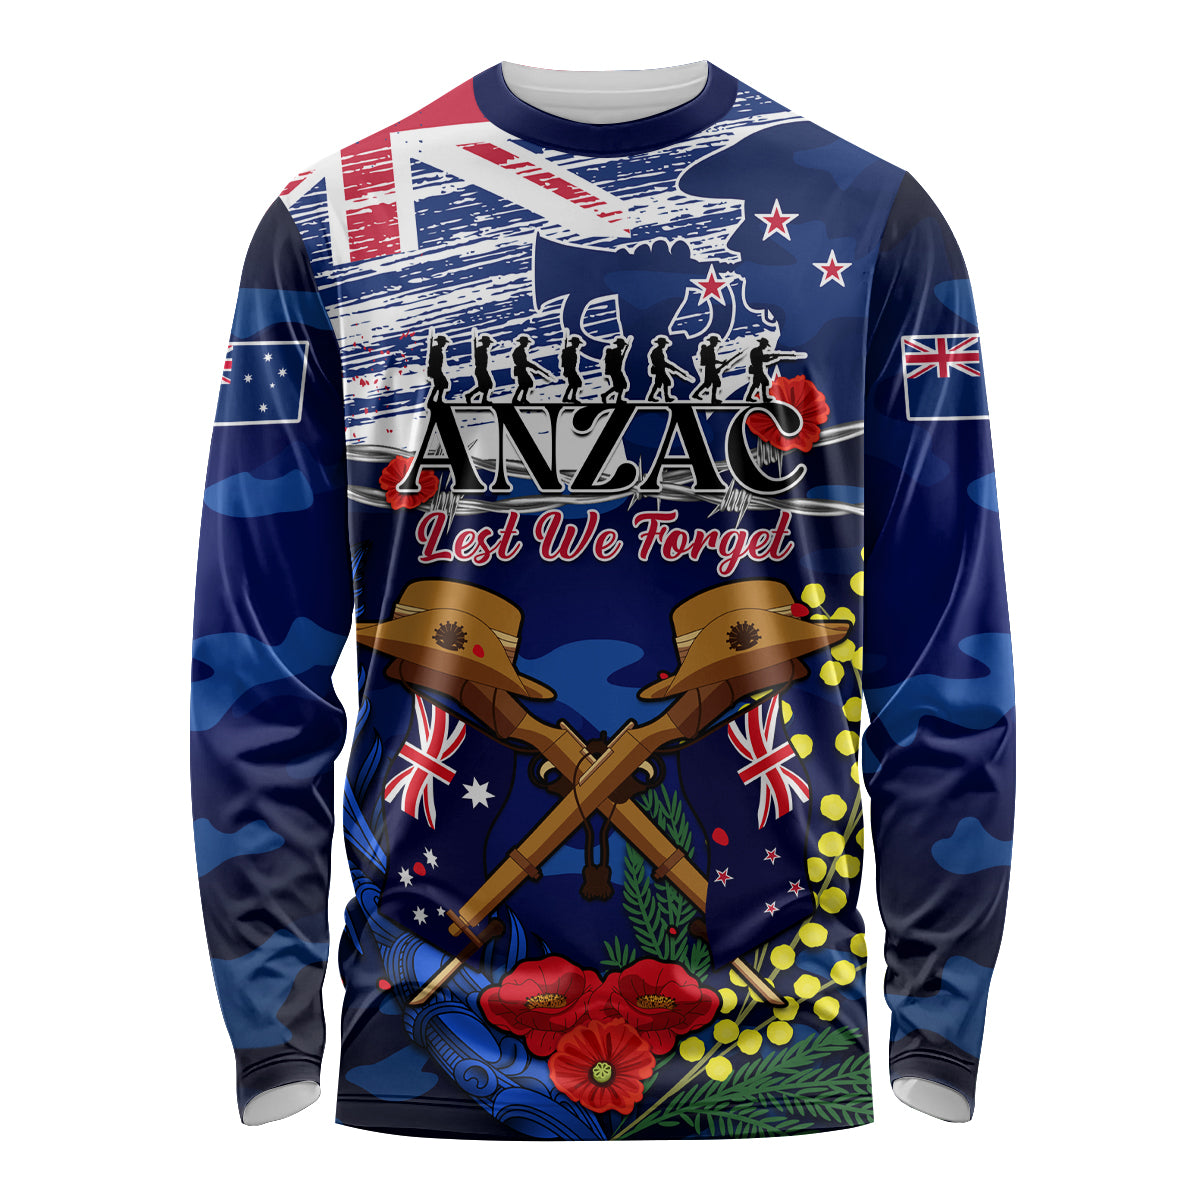 Australia And New Zealand ANZAC Day Long Sleeve Shirt Lest We Forget Silver Fern With Golden Wattle LT14 Unisex Blue - Polynesian Pride